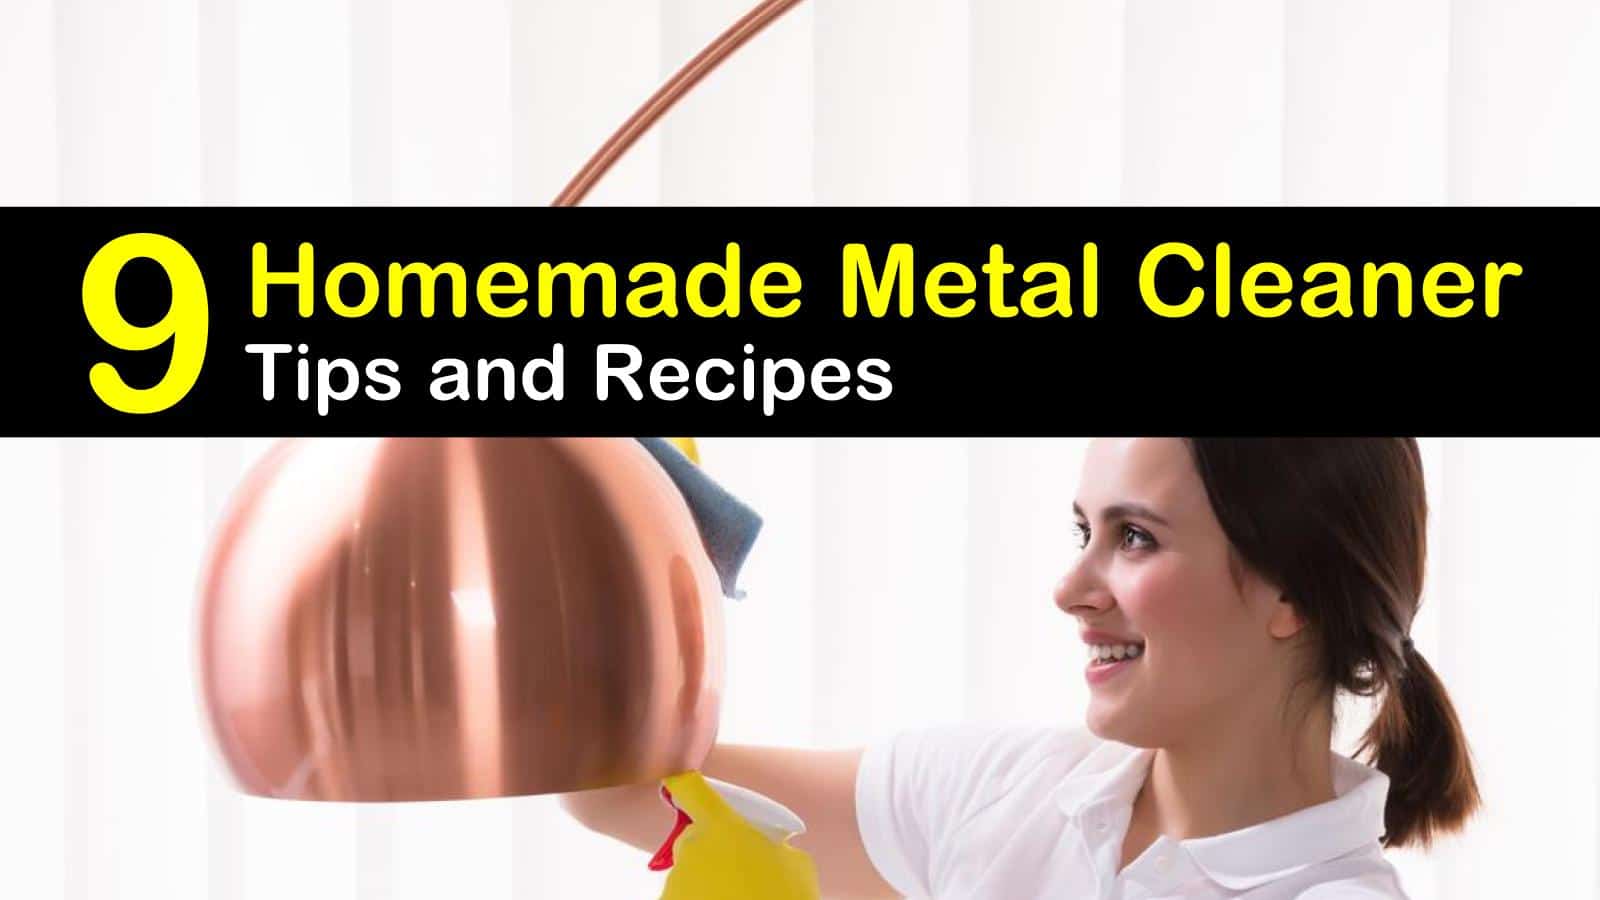 Cleaning Chrome And Polishing Chrome - Homemade Recipes And Instructions